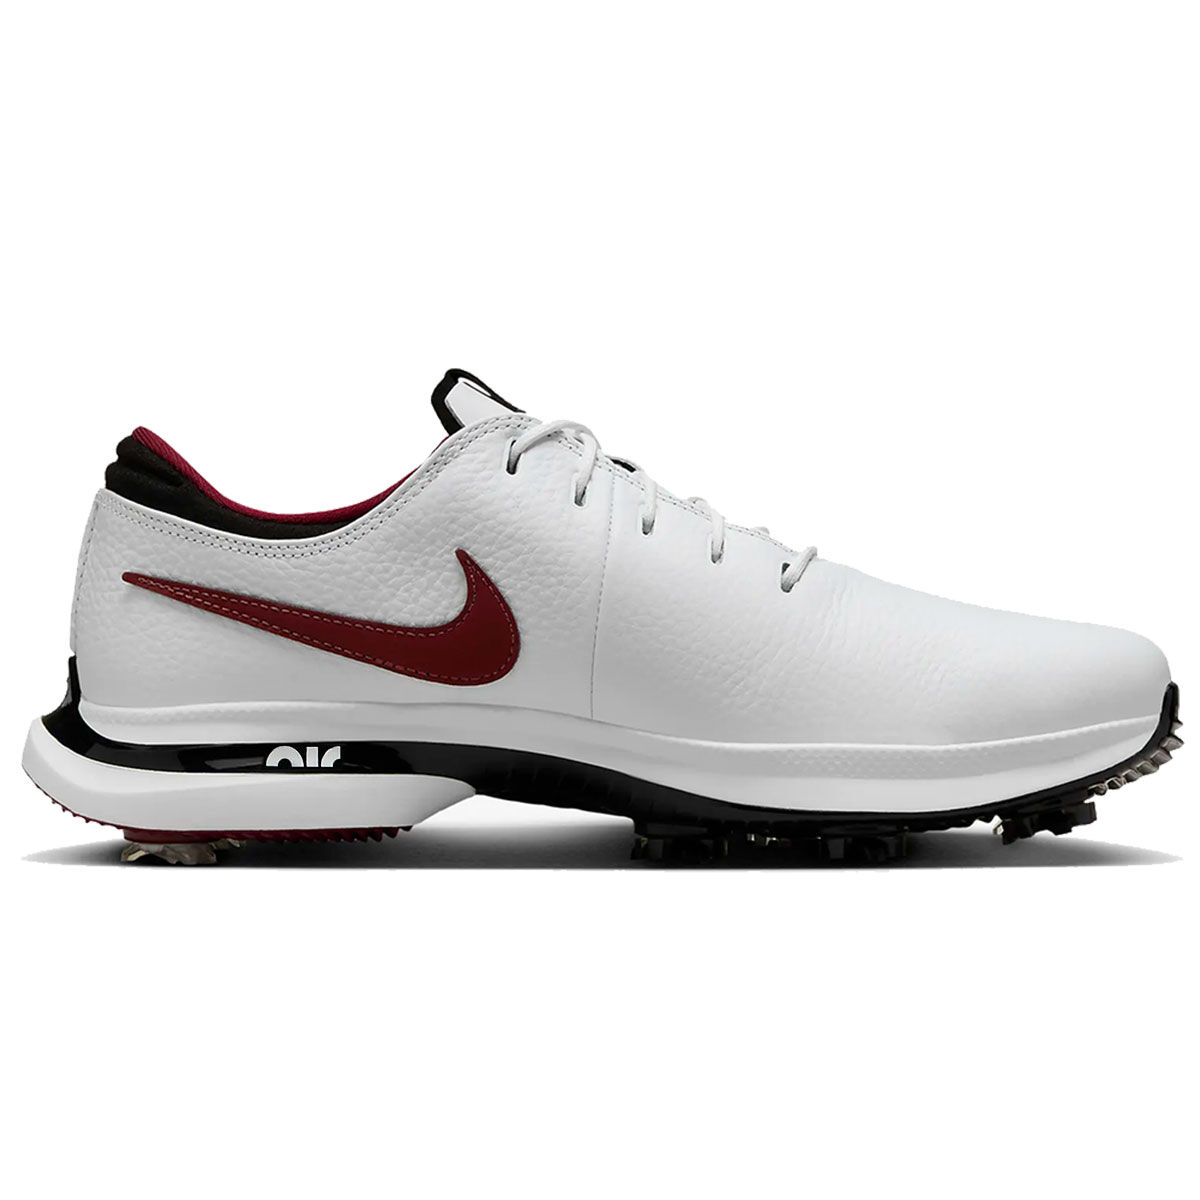 Nike Air Zoom Victory Tour 3 Waterproof Spiked Golf Shoes, Mens, White/red/black, 9 | American Golf von Nike Golf